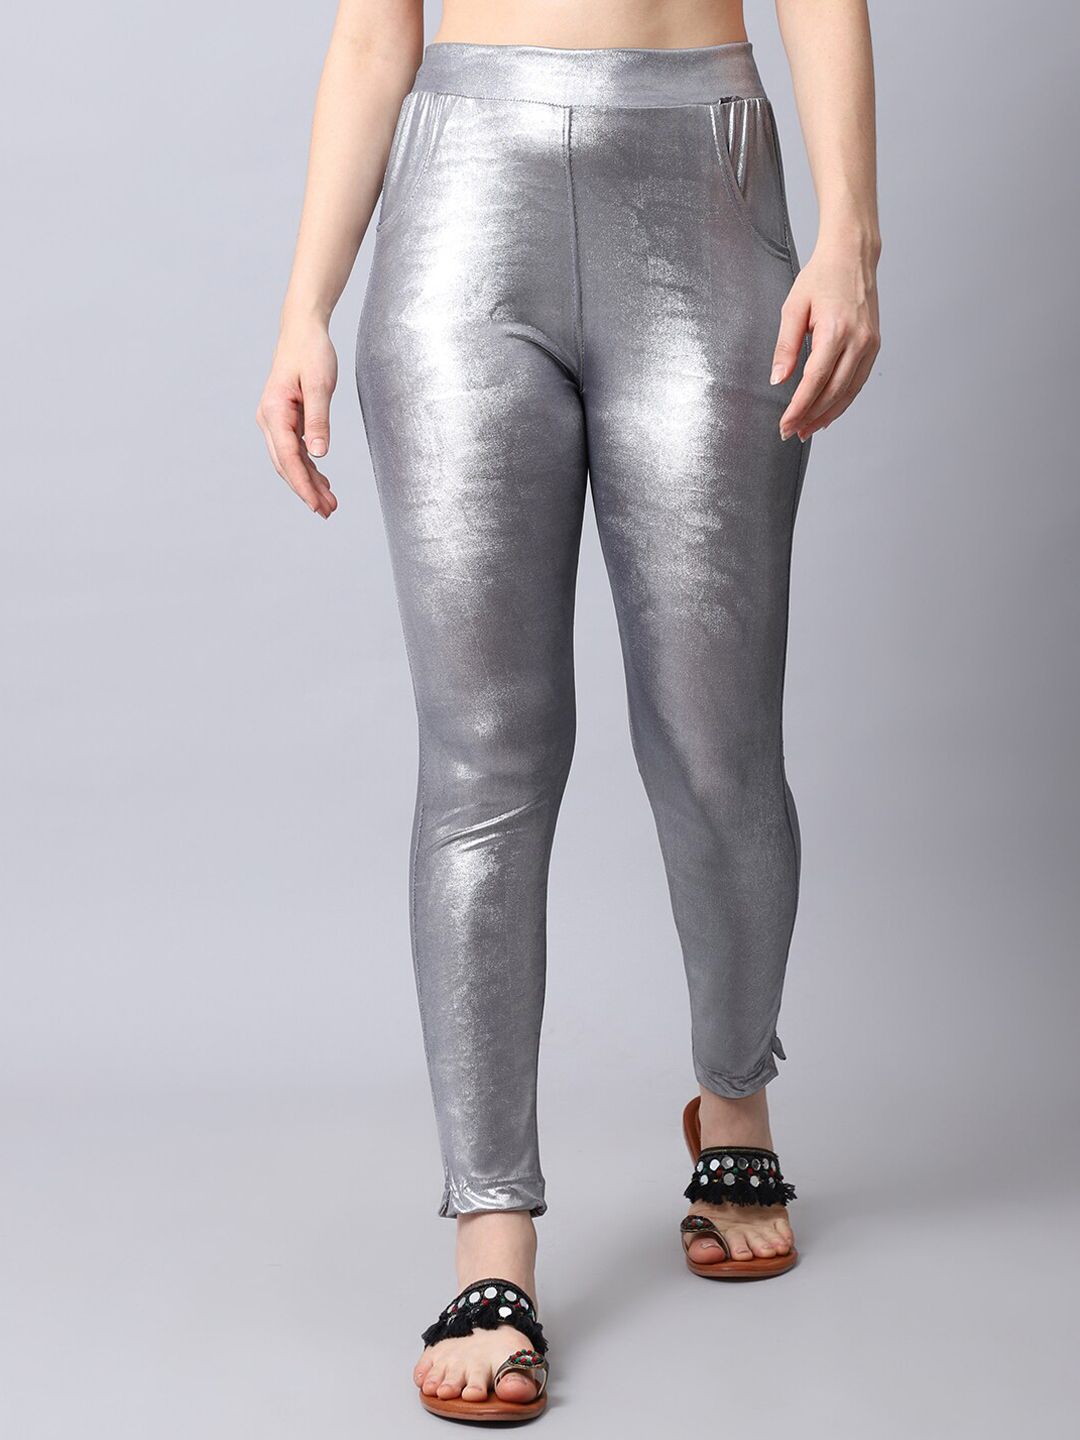 TAG 7 Women Silver-Toned Solid Ankle-Length Leggings Price in India